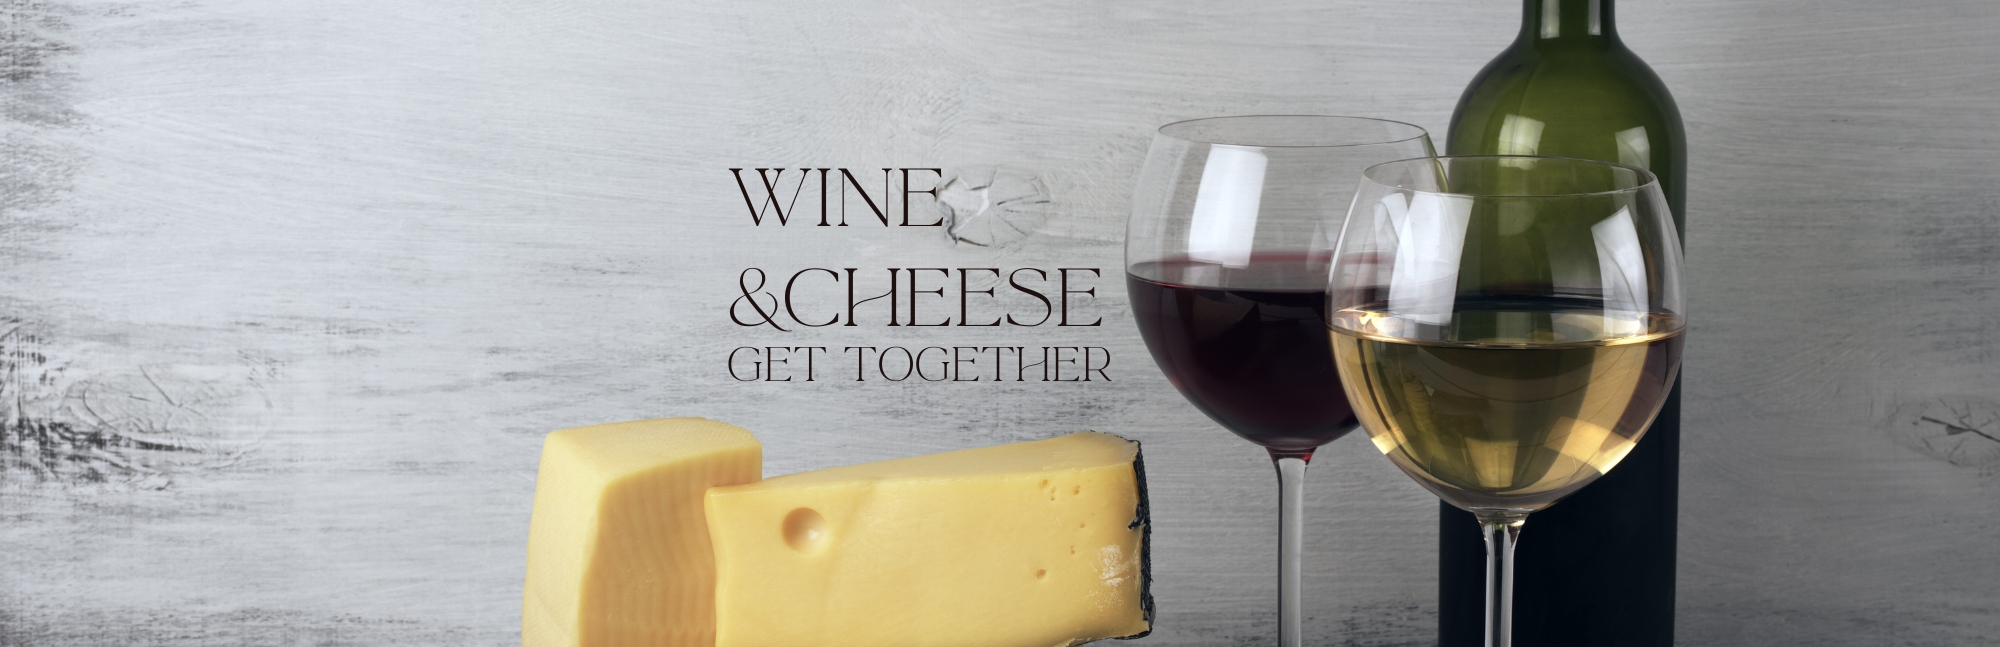 Wine&Cheese Get Together- Coming Soon